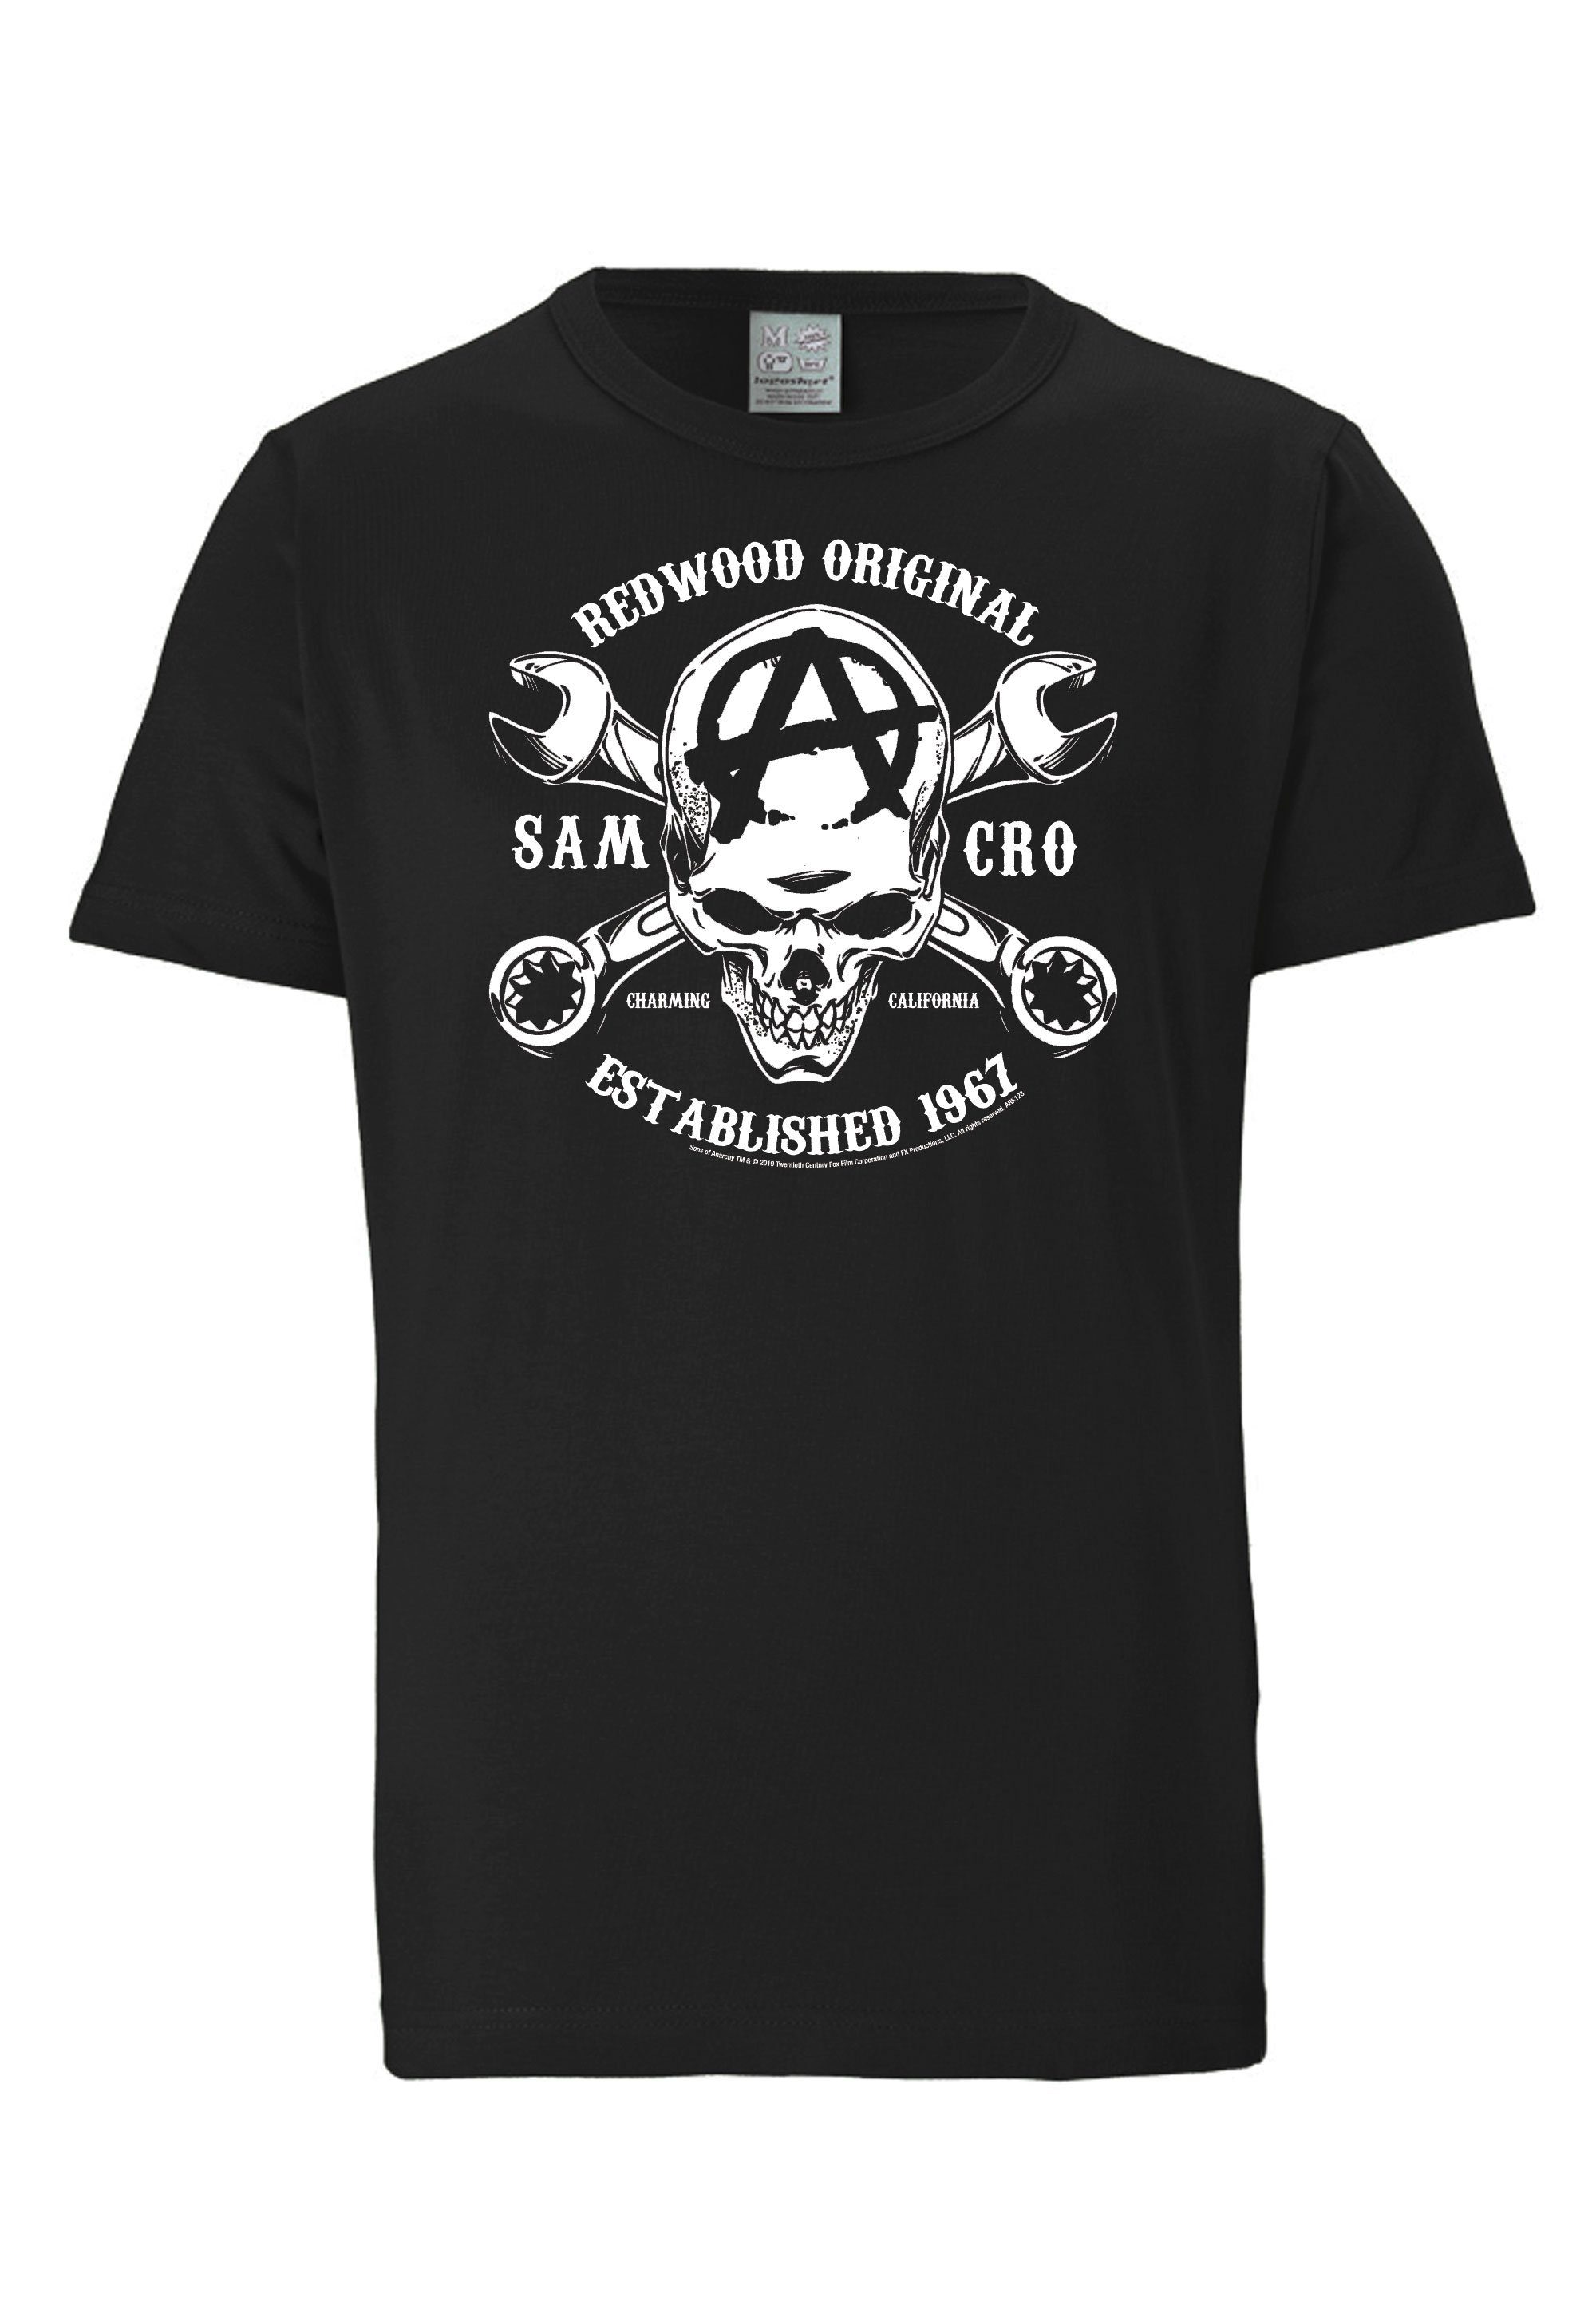 Anarchy mit of SAMCRO T-Shirt LOGOSHIRT Sons Sons Anarchy-Print of